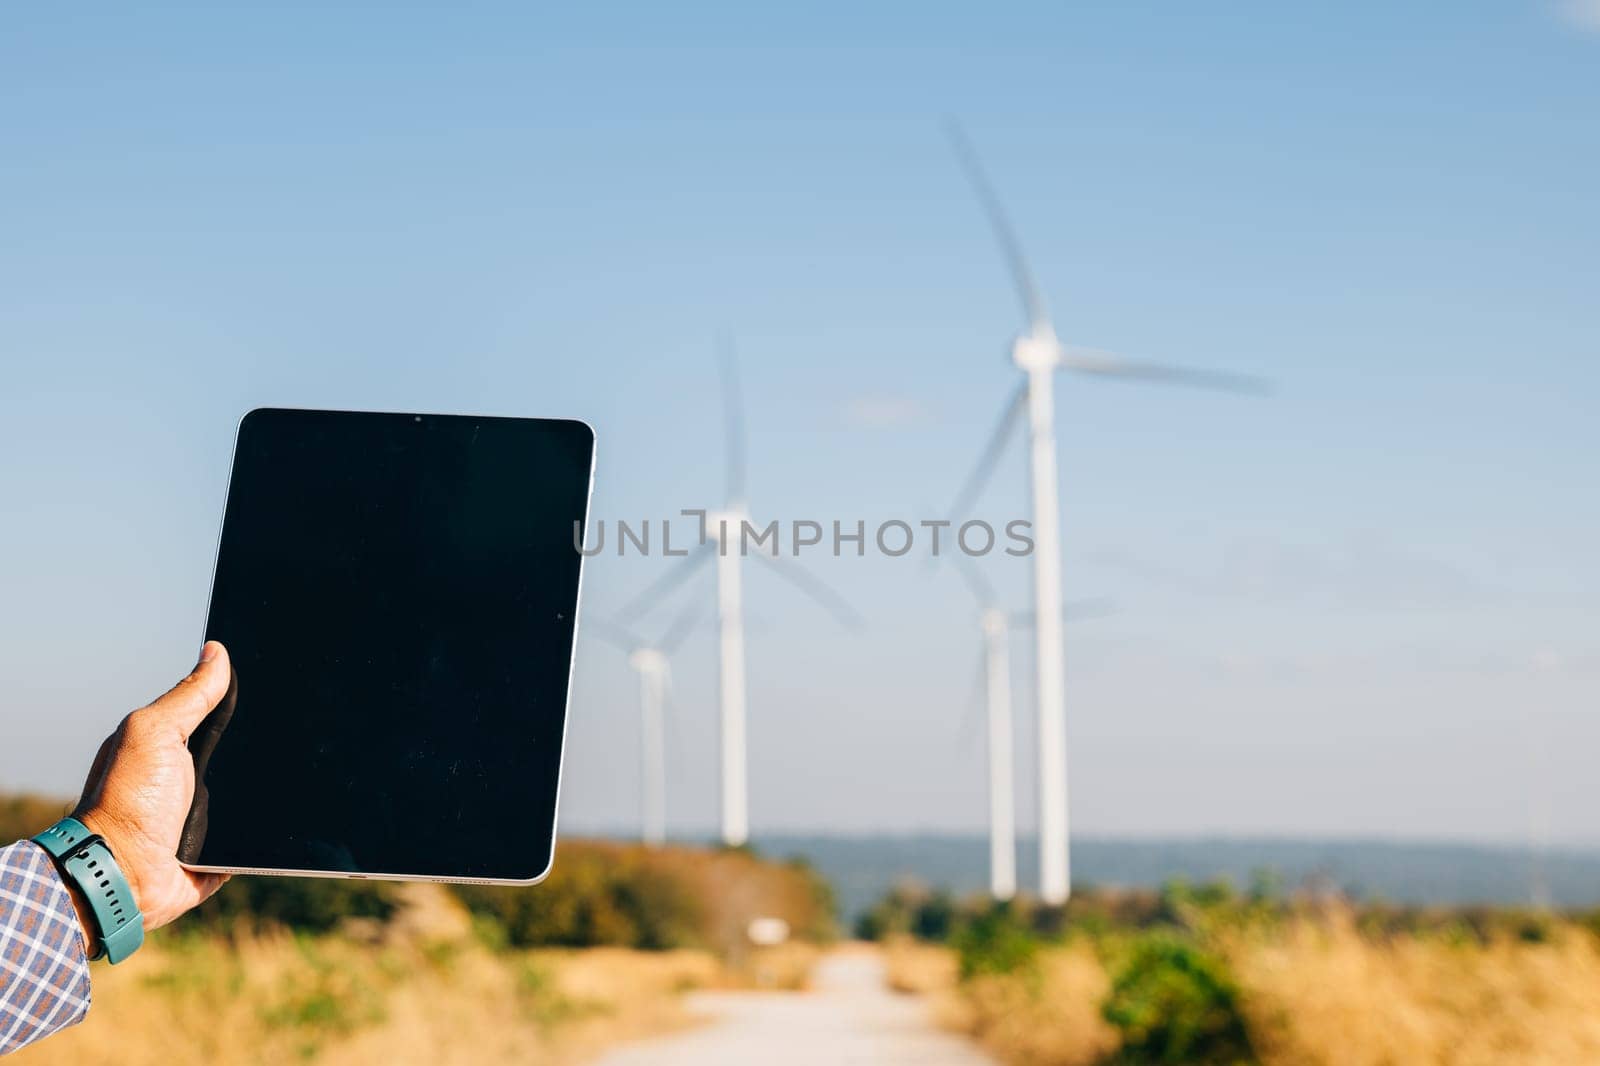 Technician tablet in hand at windmill farm. Engineer ensures clean energy. Expertise in turbine efficiency and global electricity control portrayed confidently.